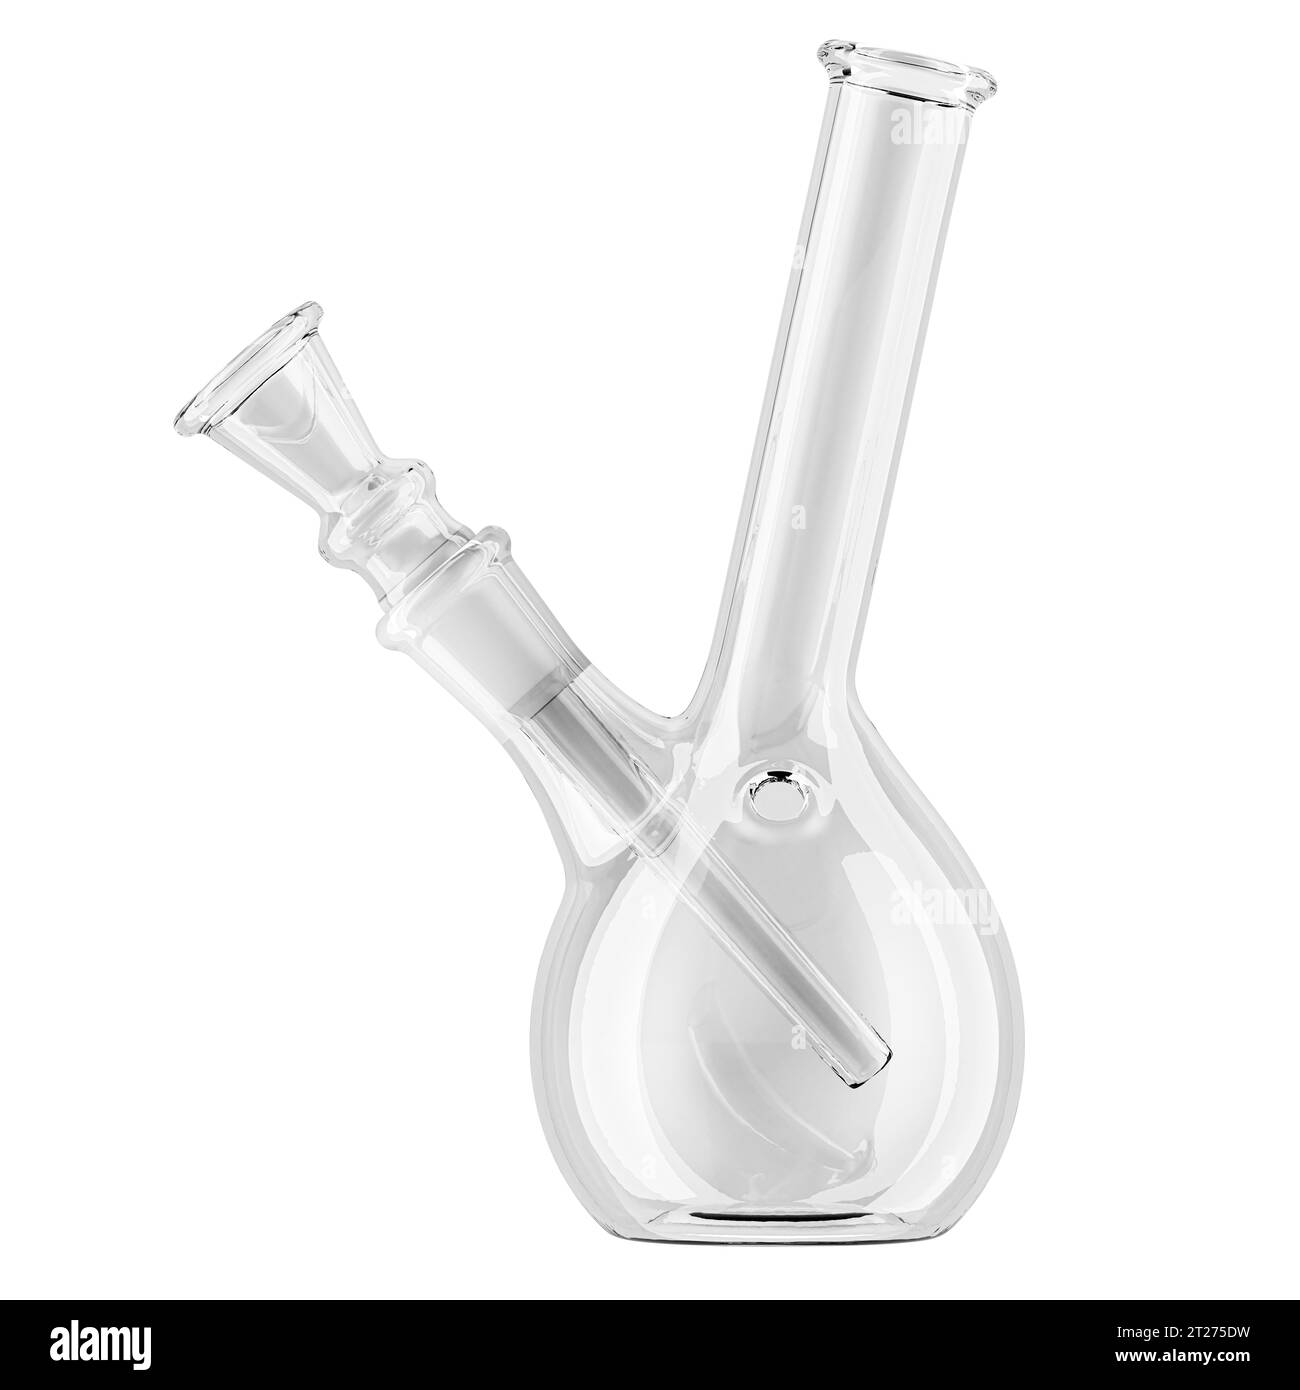 Glass Bong, bong for smoking. 3D rendering isolated on white background Stock Photo